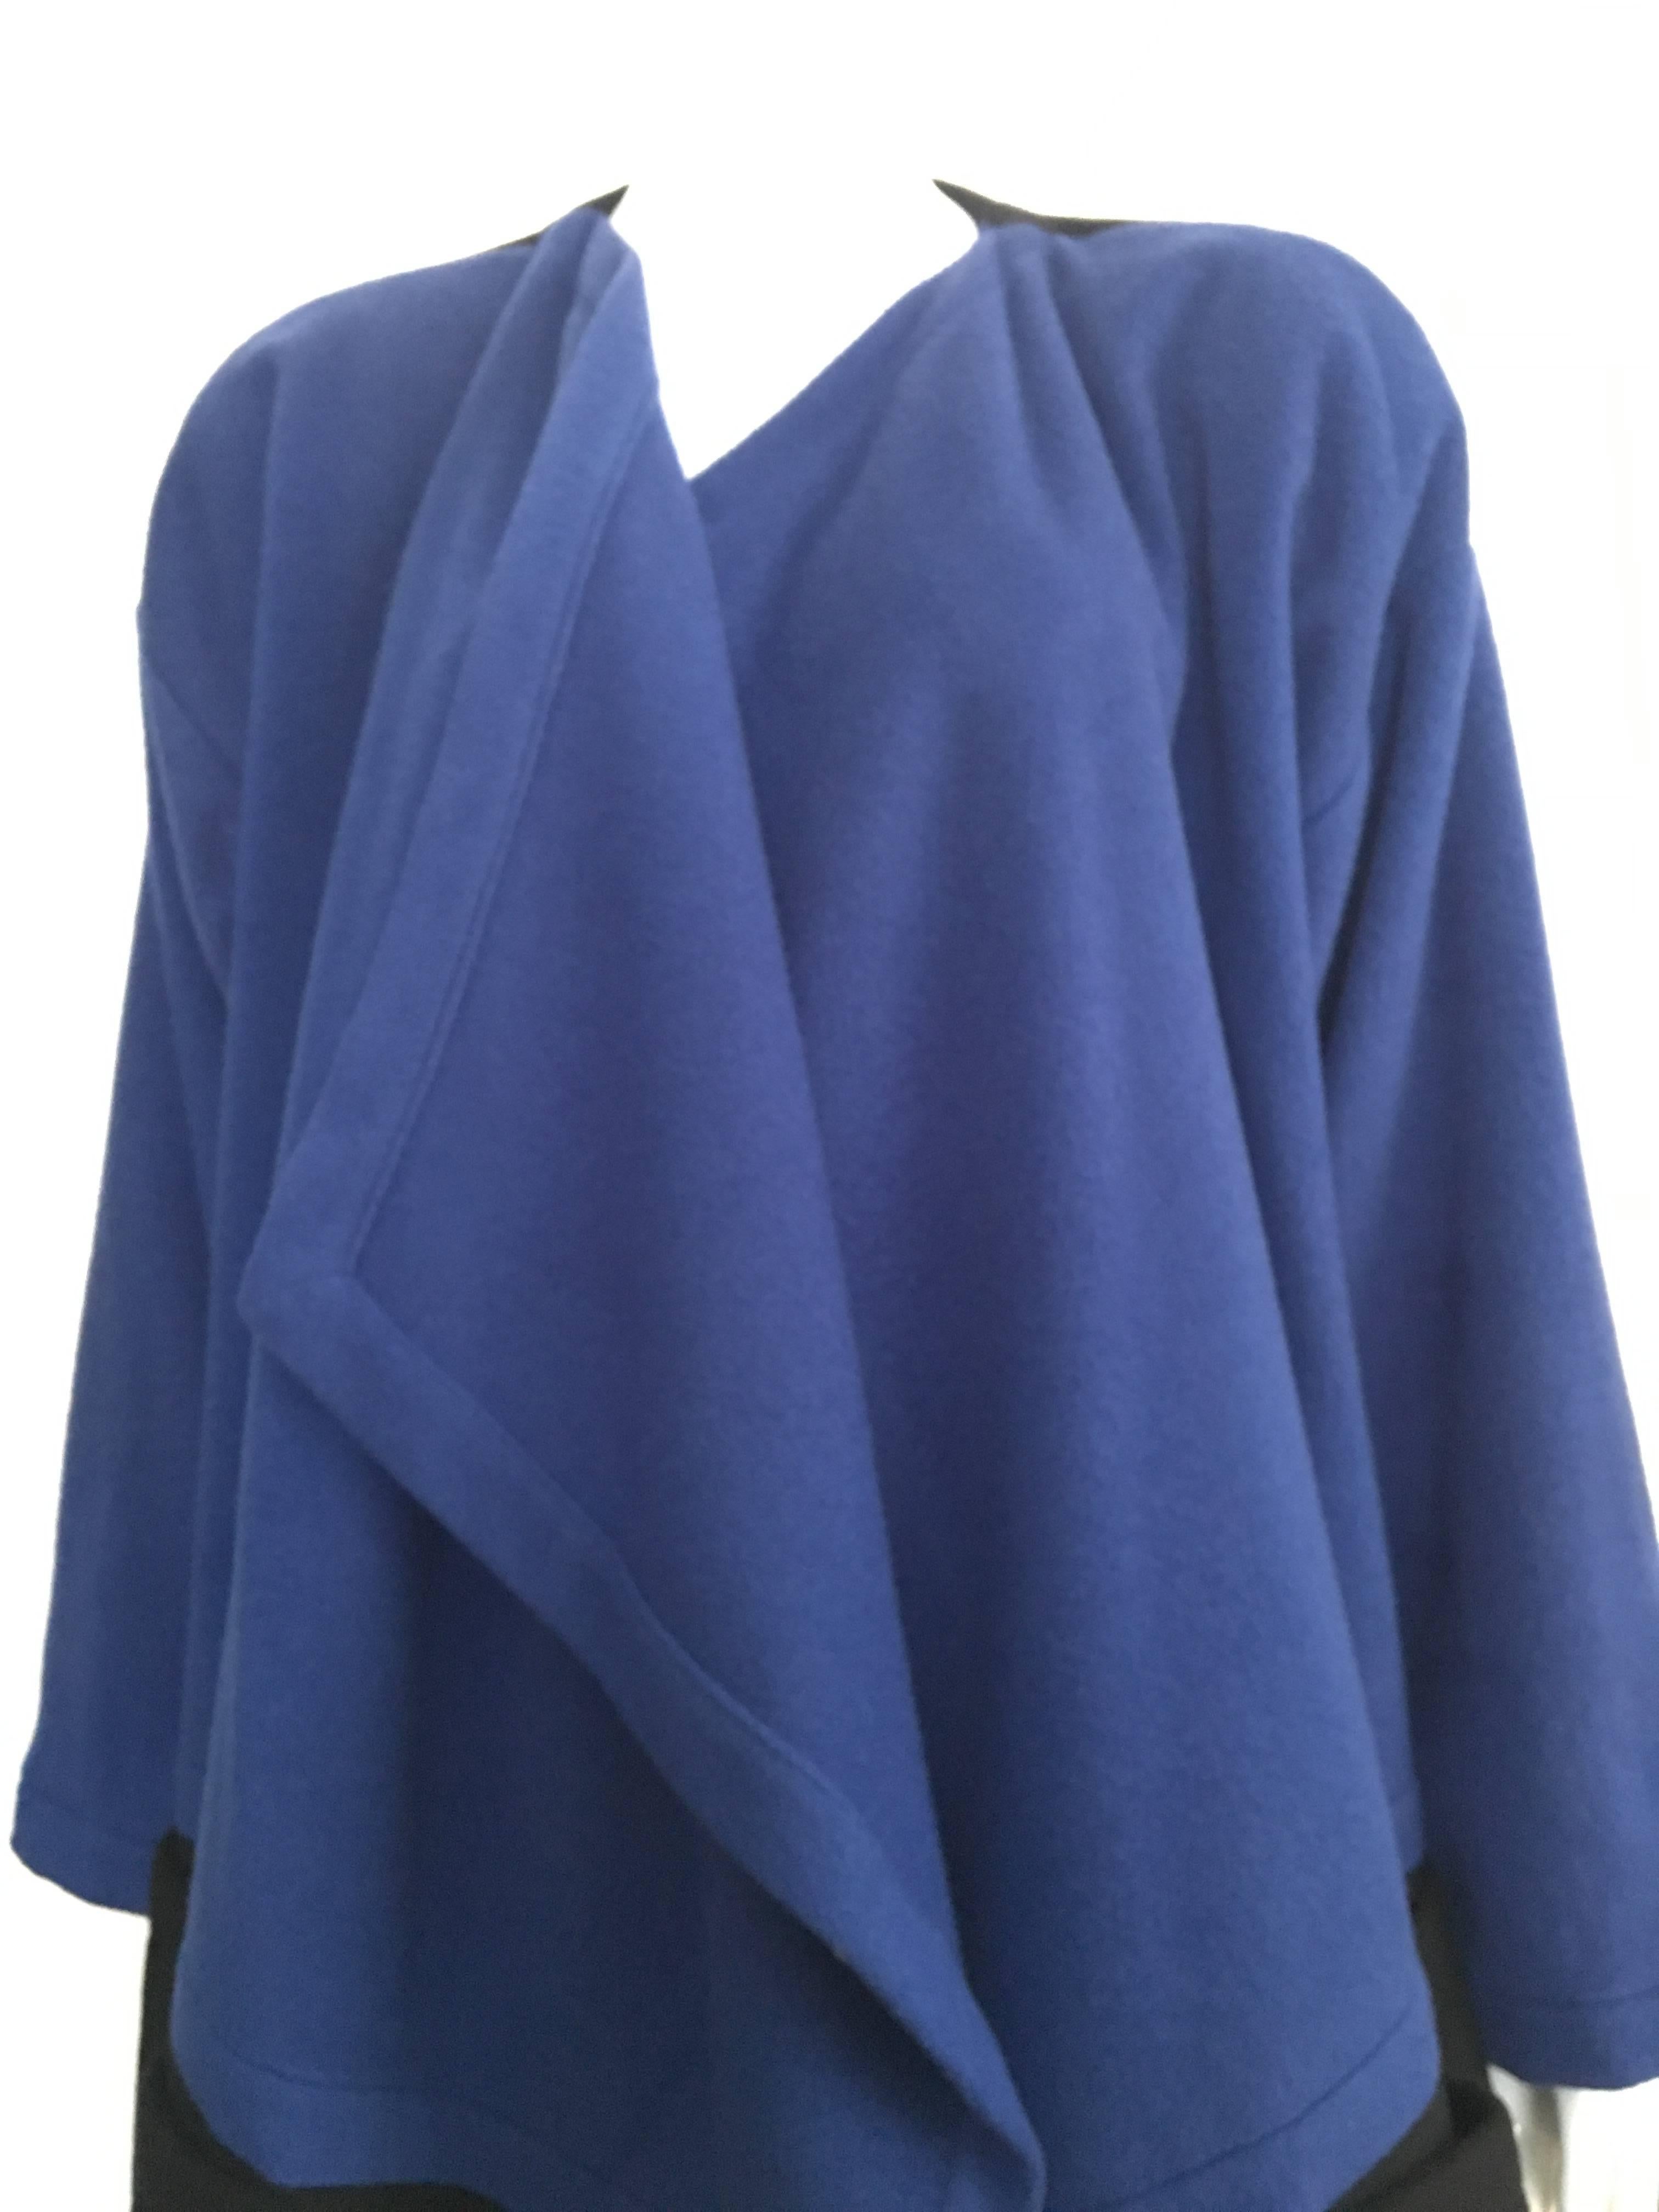 Patrick Kelly Paris 1980s cobalt blue & black wool & cashmere coat will fit a USA size 8 / 10.  This coat is from the private collection of a woman that worked in New York City during the 1980s and wait till you hear her story...  She worked